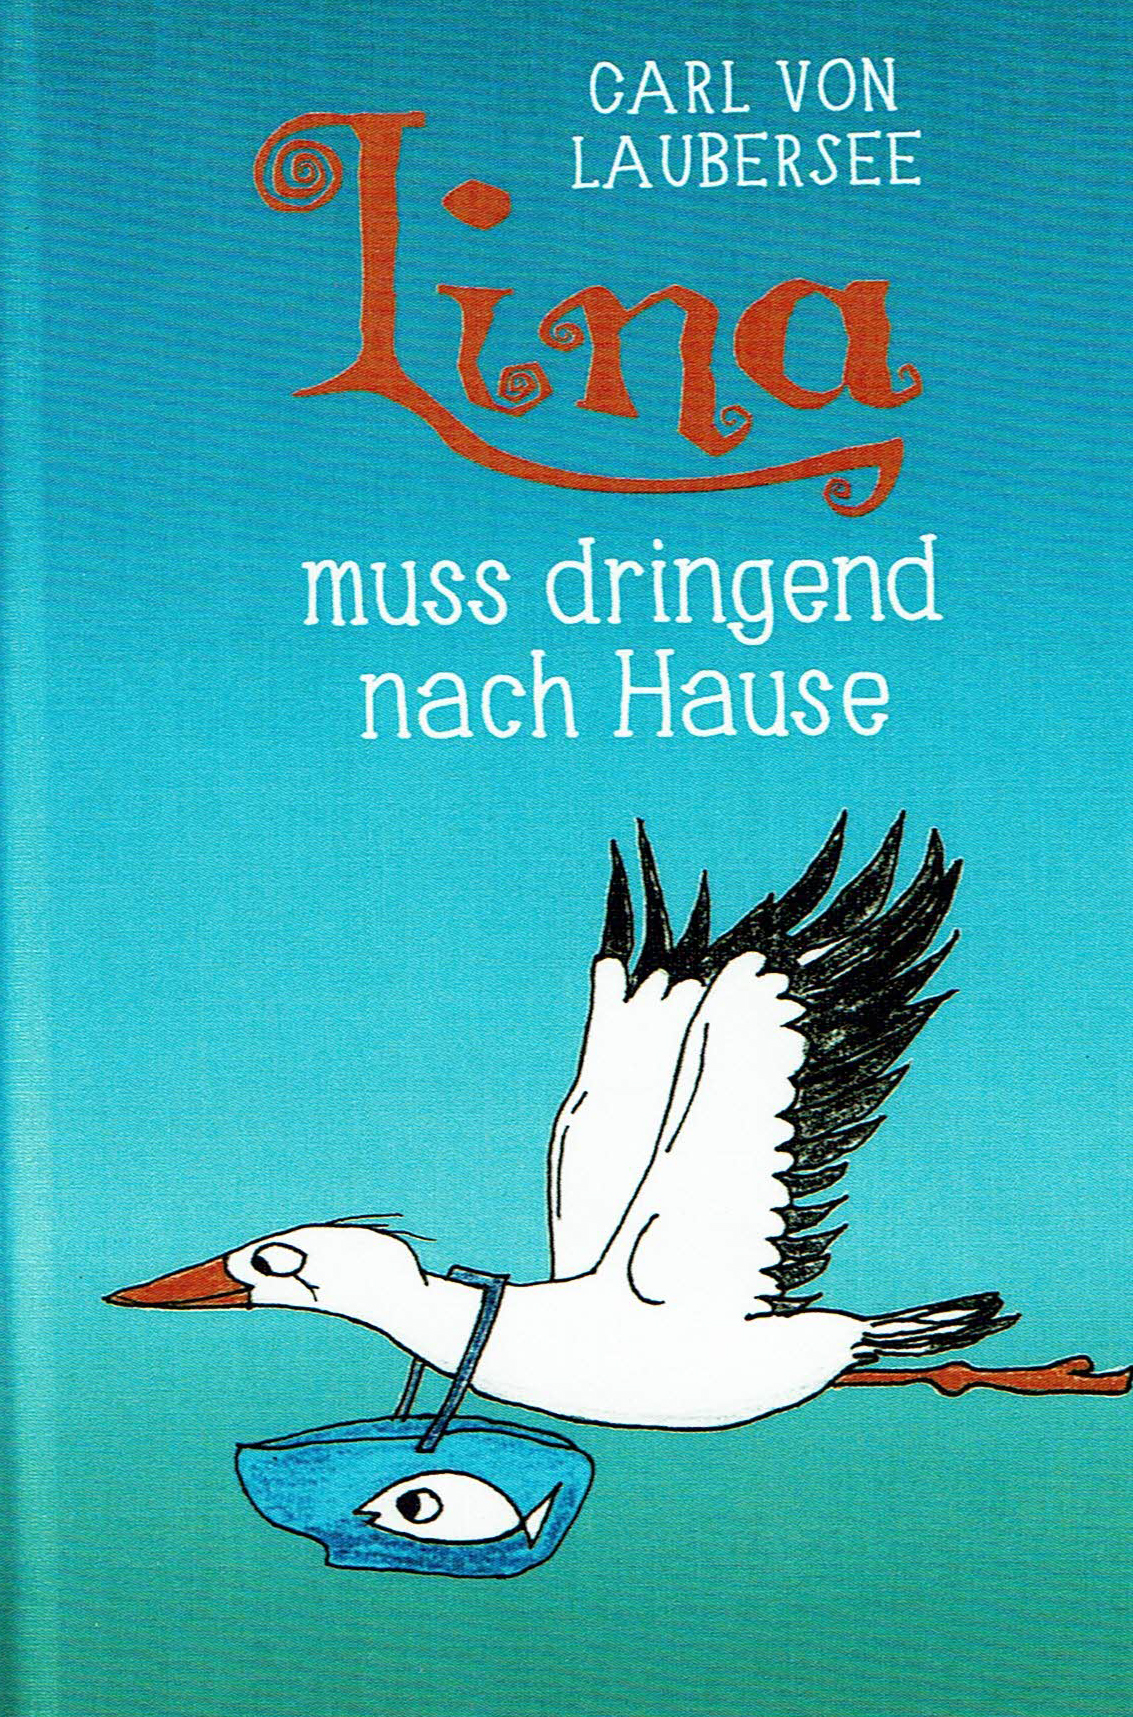 Cover: Lina